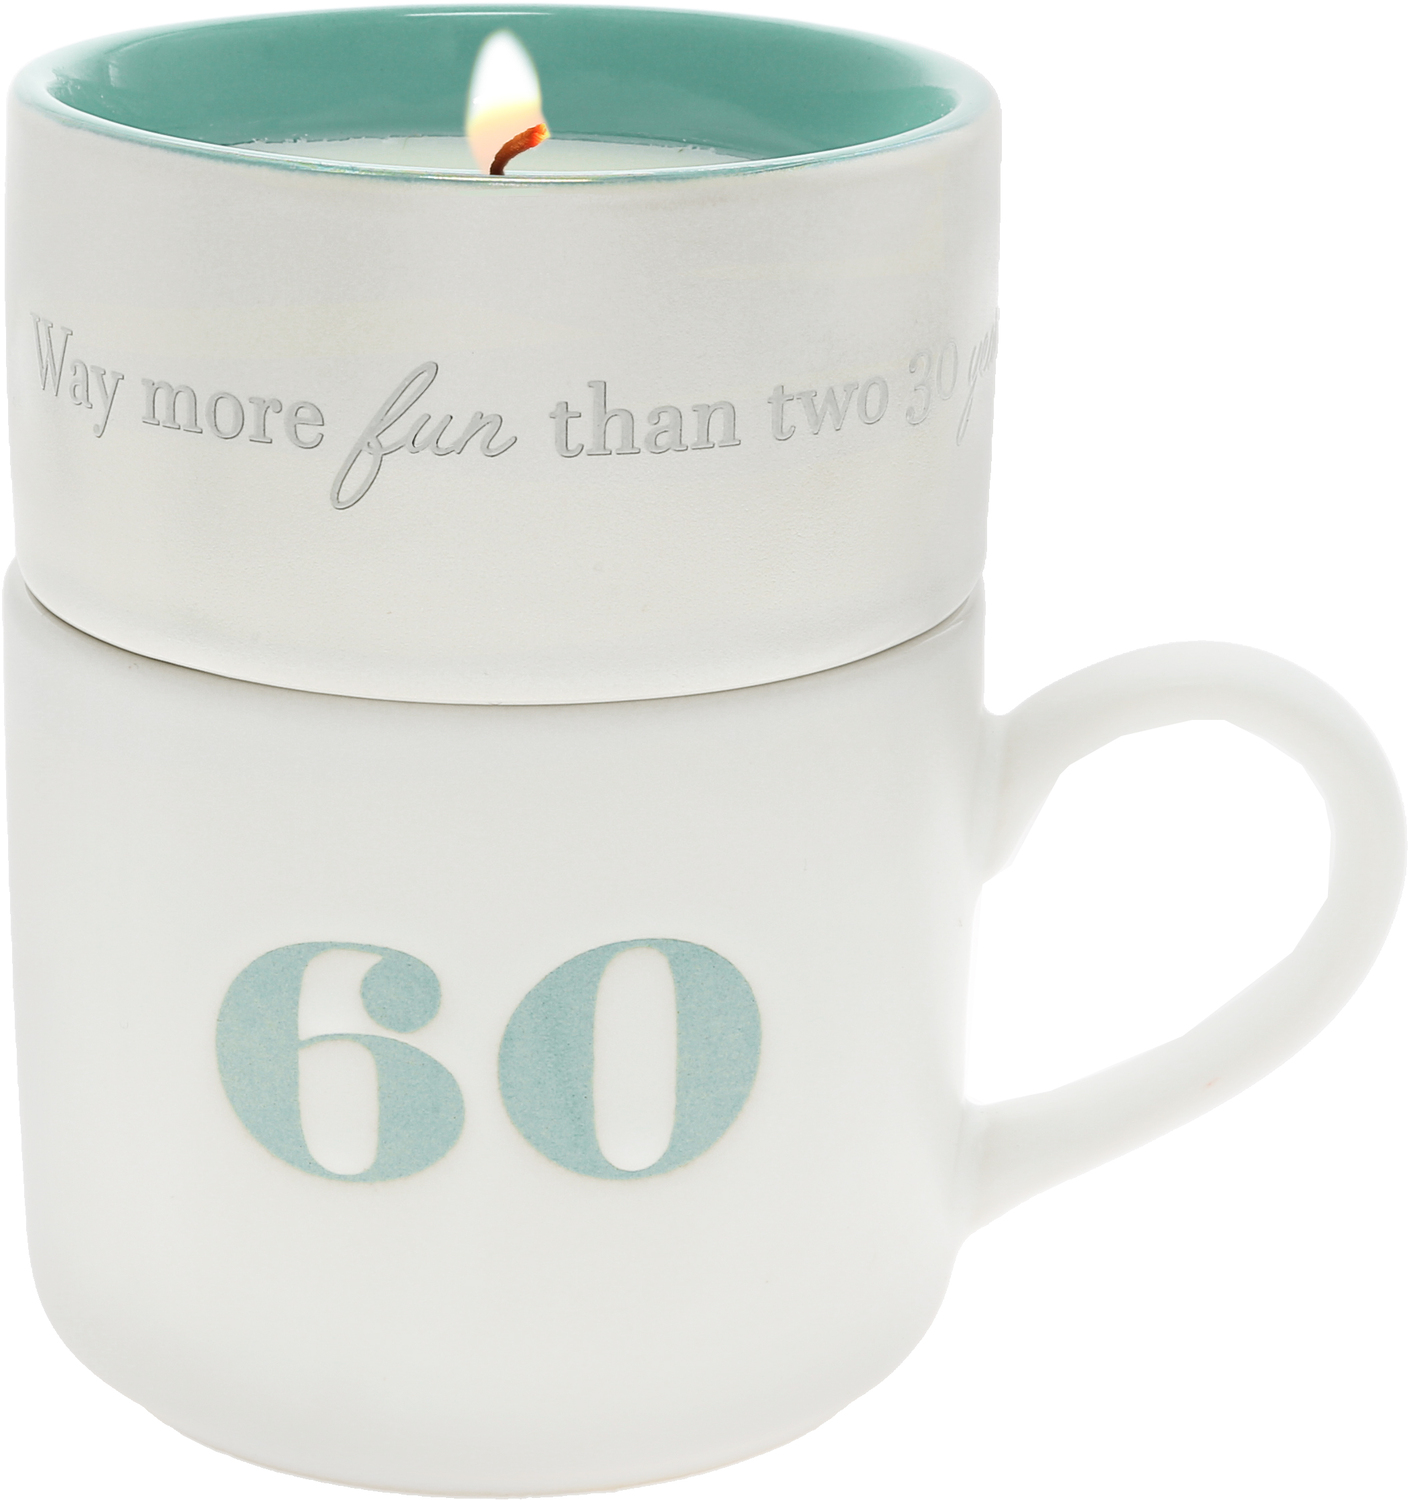 60 by Filled with Warmth - 60 - Stacking Mug and Candle Set
100% Soy Wax Scent: Tranquility